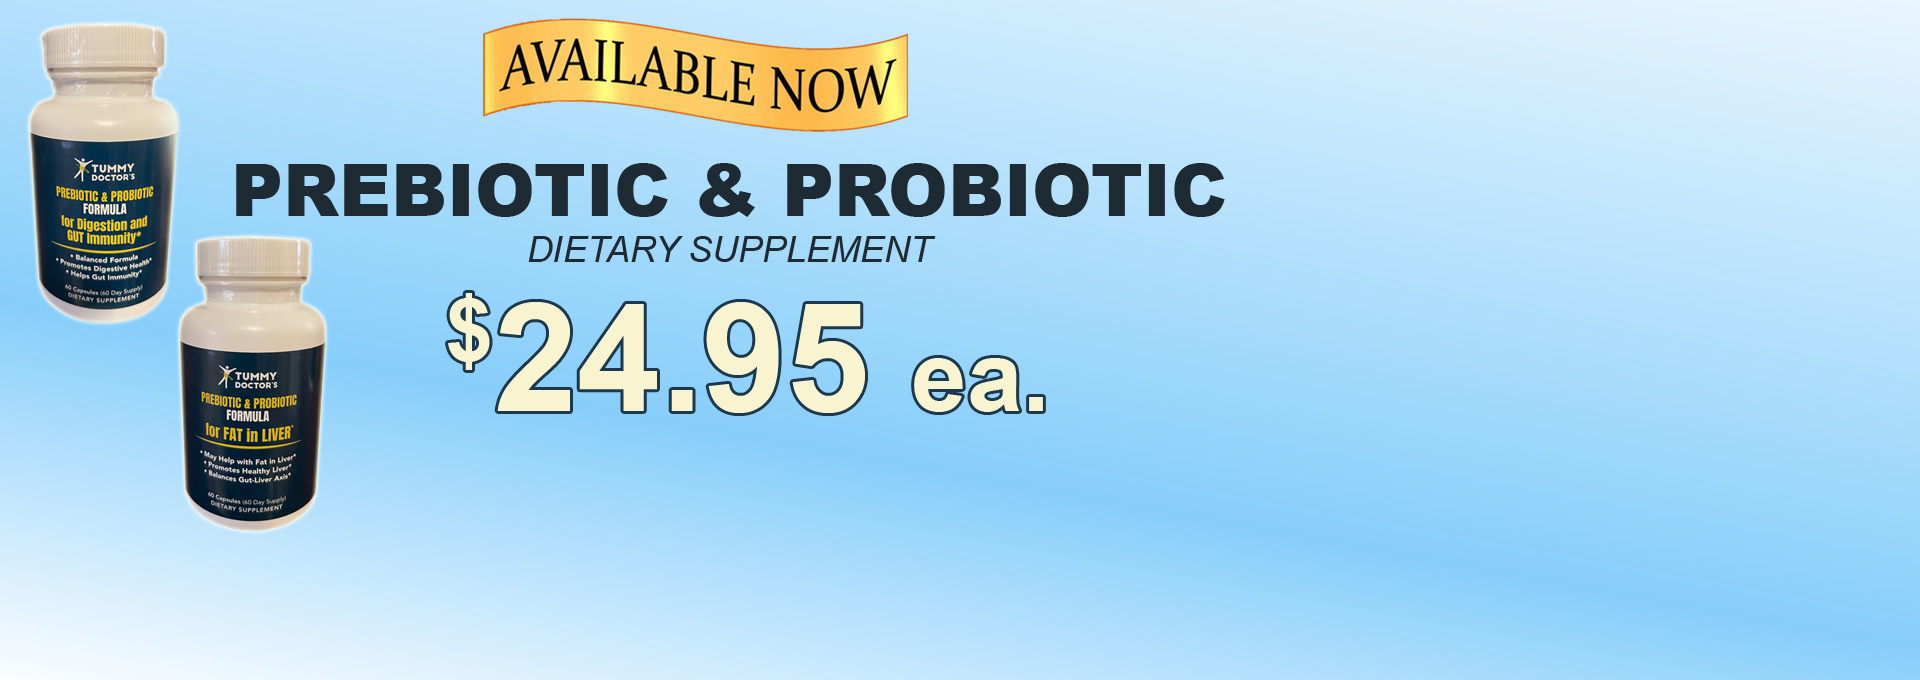 probiotic and prebiotic dietery supplements